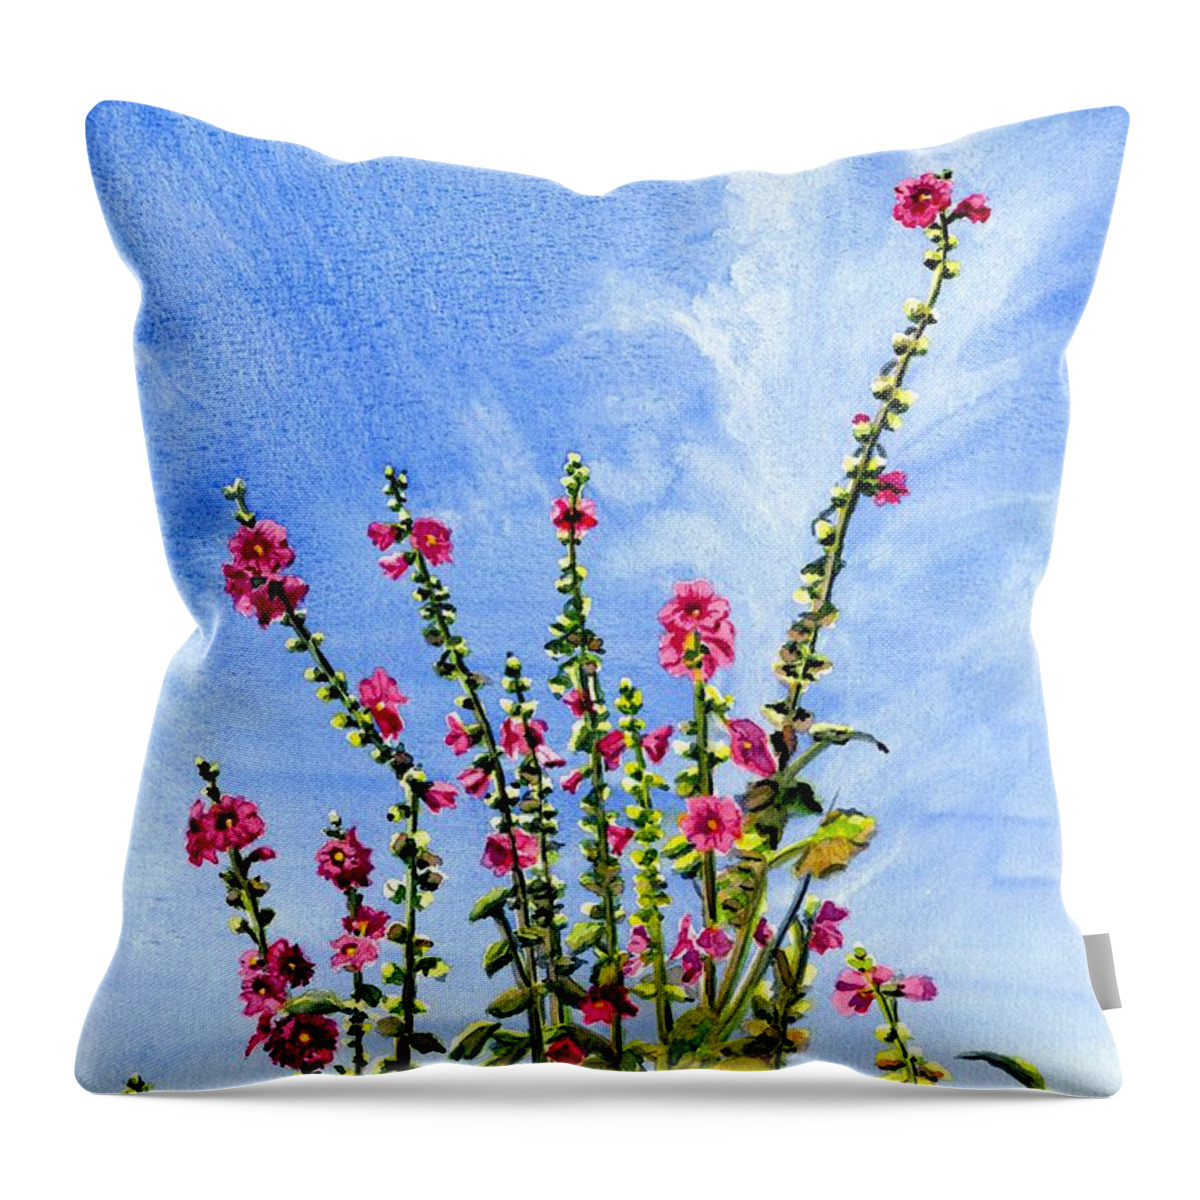 Reach To The Sky Throw Pillow featuring the painting View From Main St Monhegan by Melly Terpening